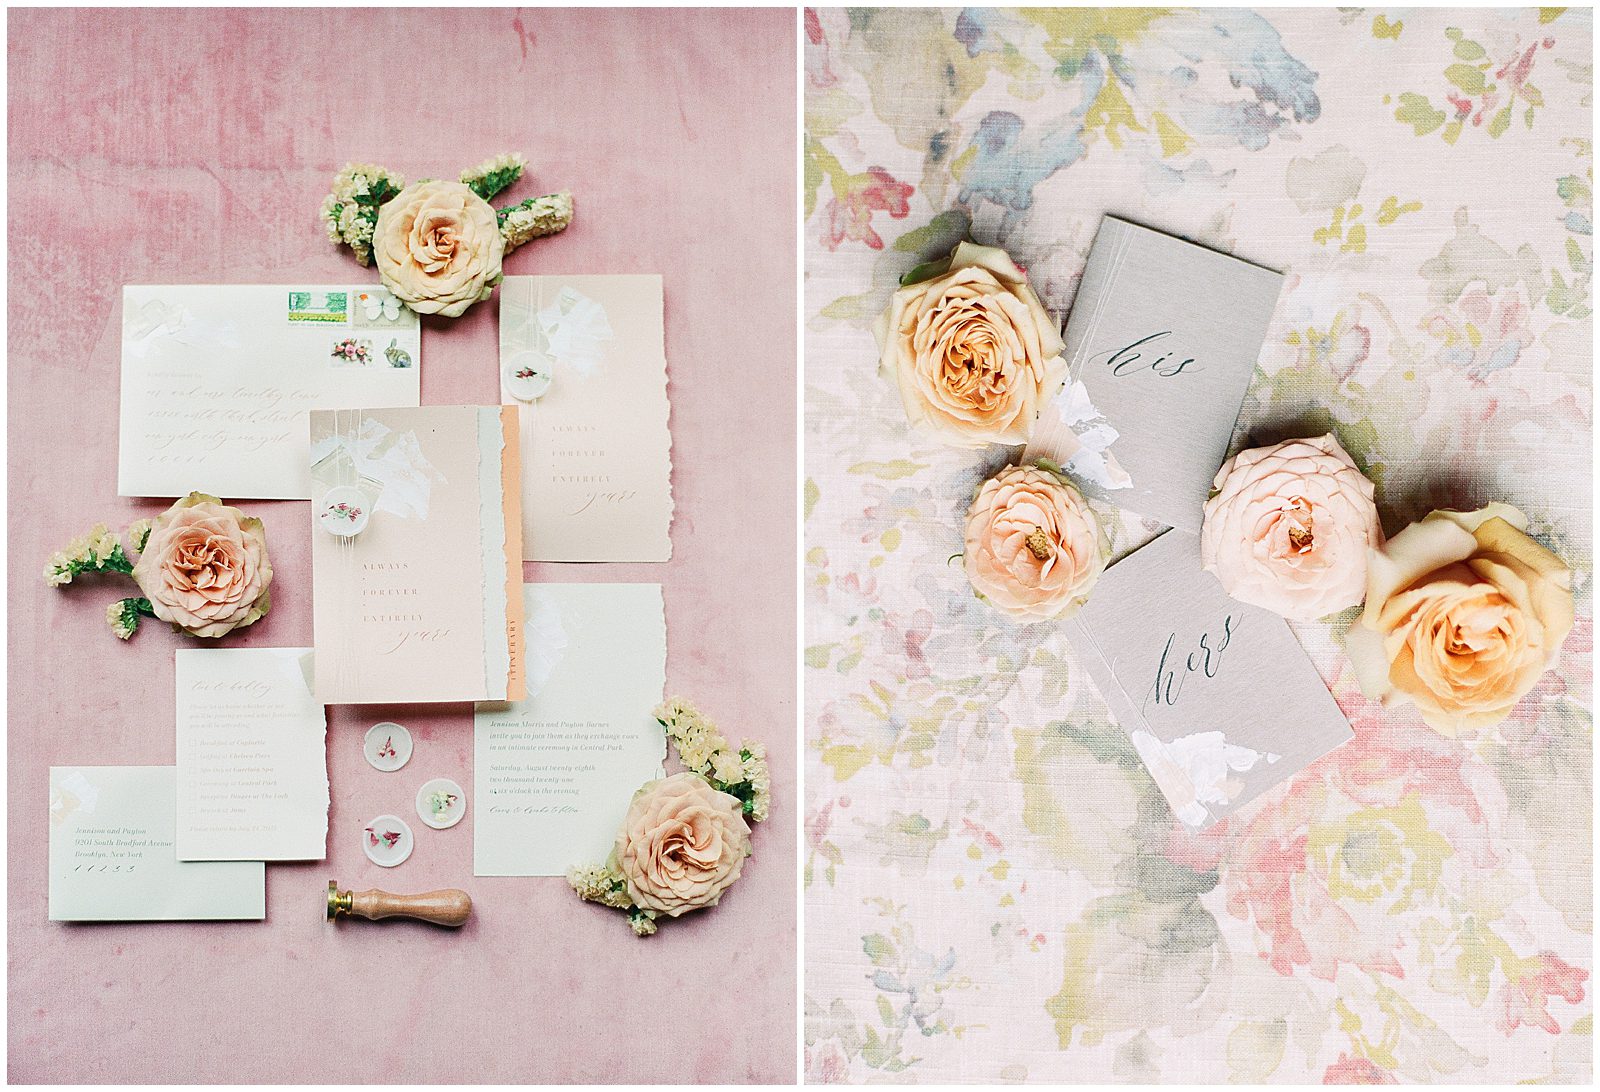 Central Park Wedding Invitation and and Vow Books Photos